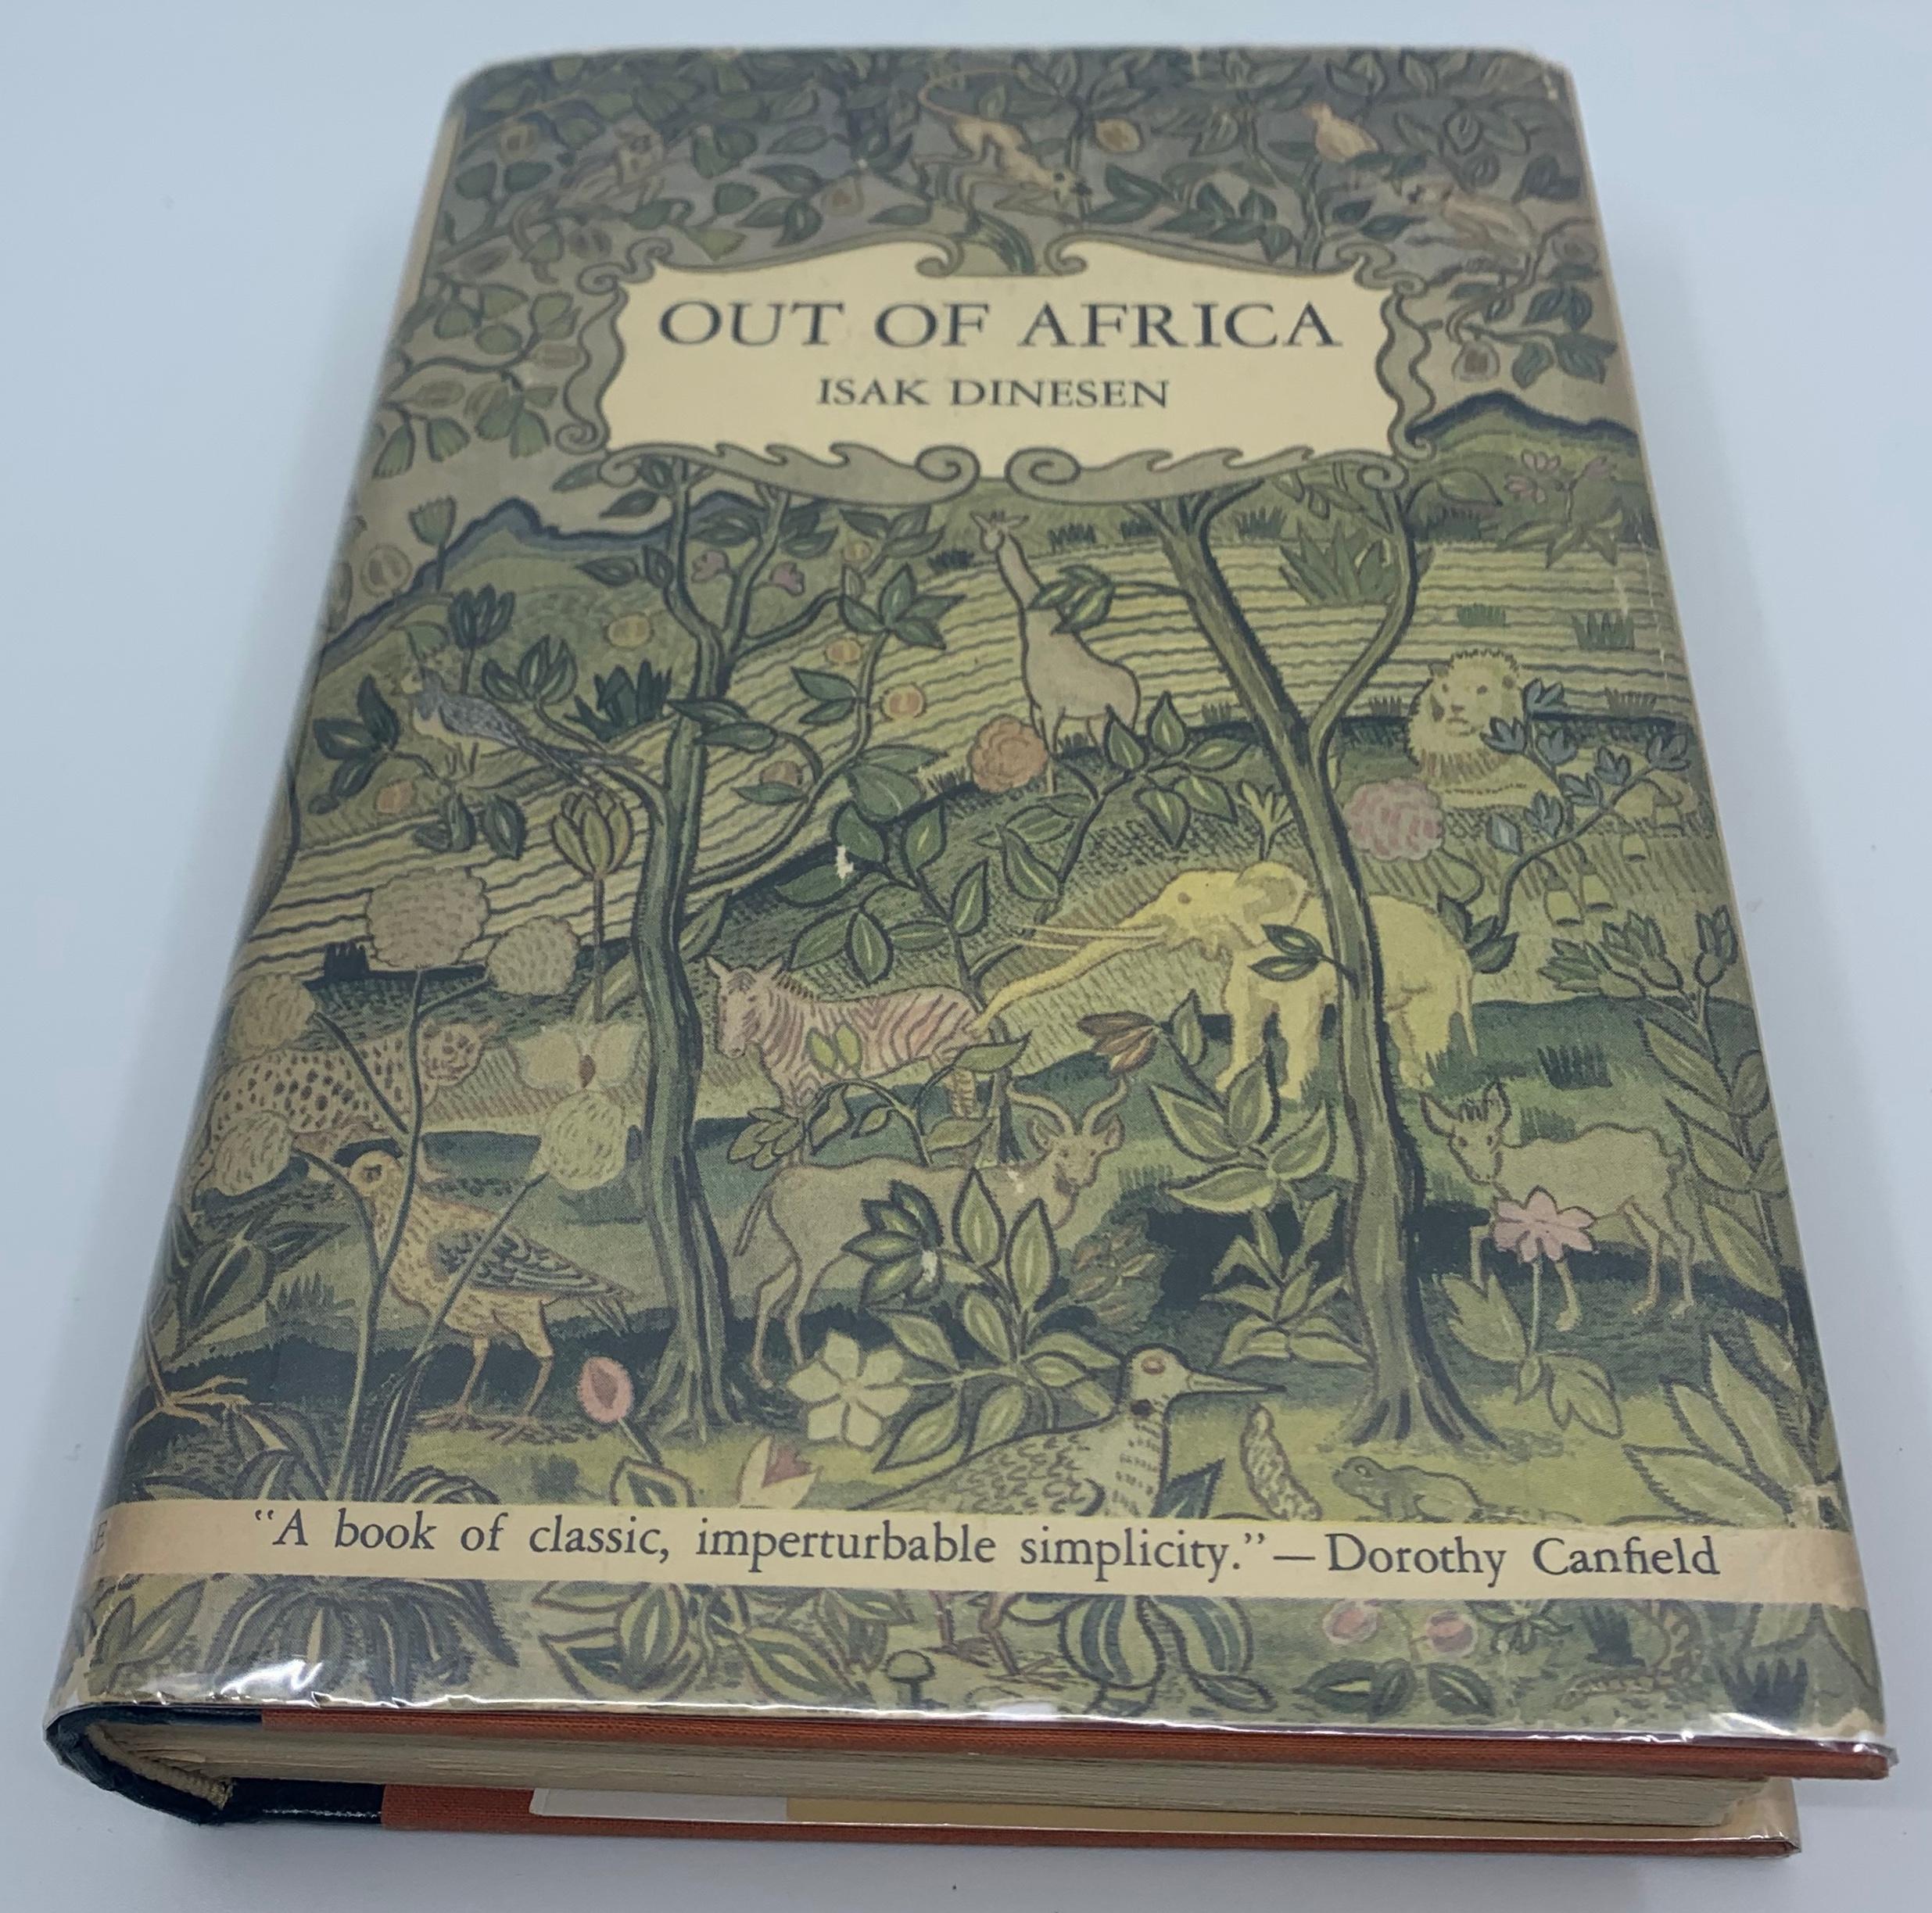 Out of Africa, Isak Dinesen. First Edition. One of the most popular works of the authoress Isak Dinesen, non se plume of Baroness Blixen written in colonial era East Africa. Original dust jacket in protective melamine sleeve over orange cloth board